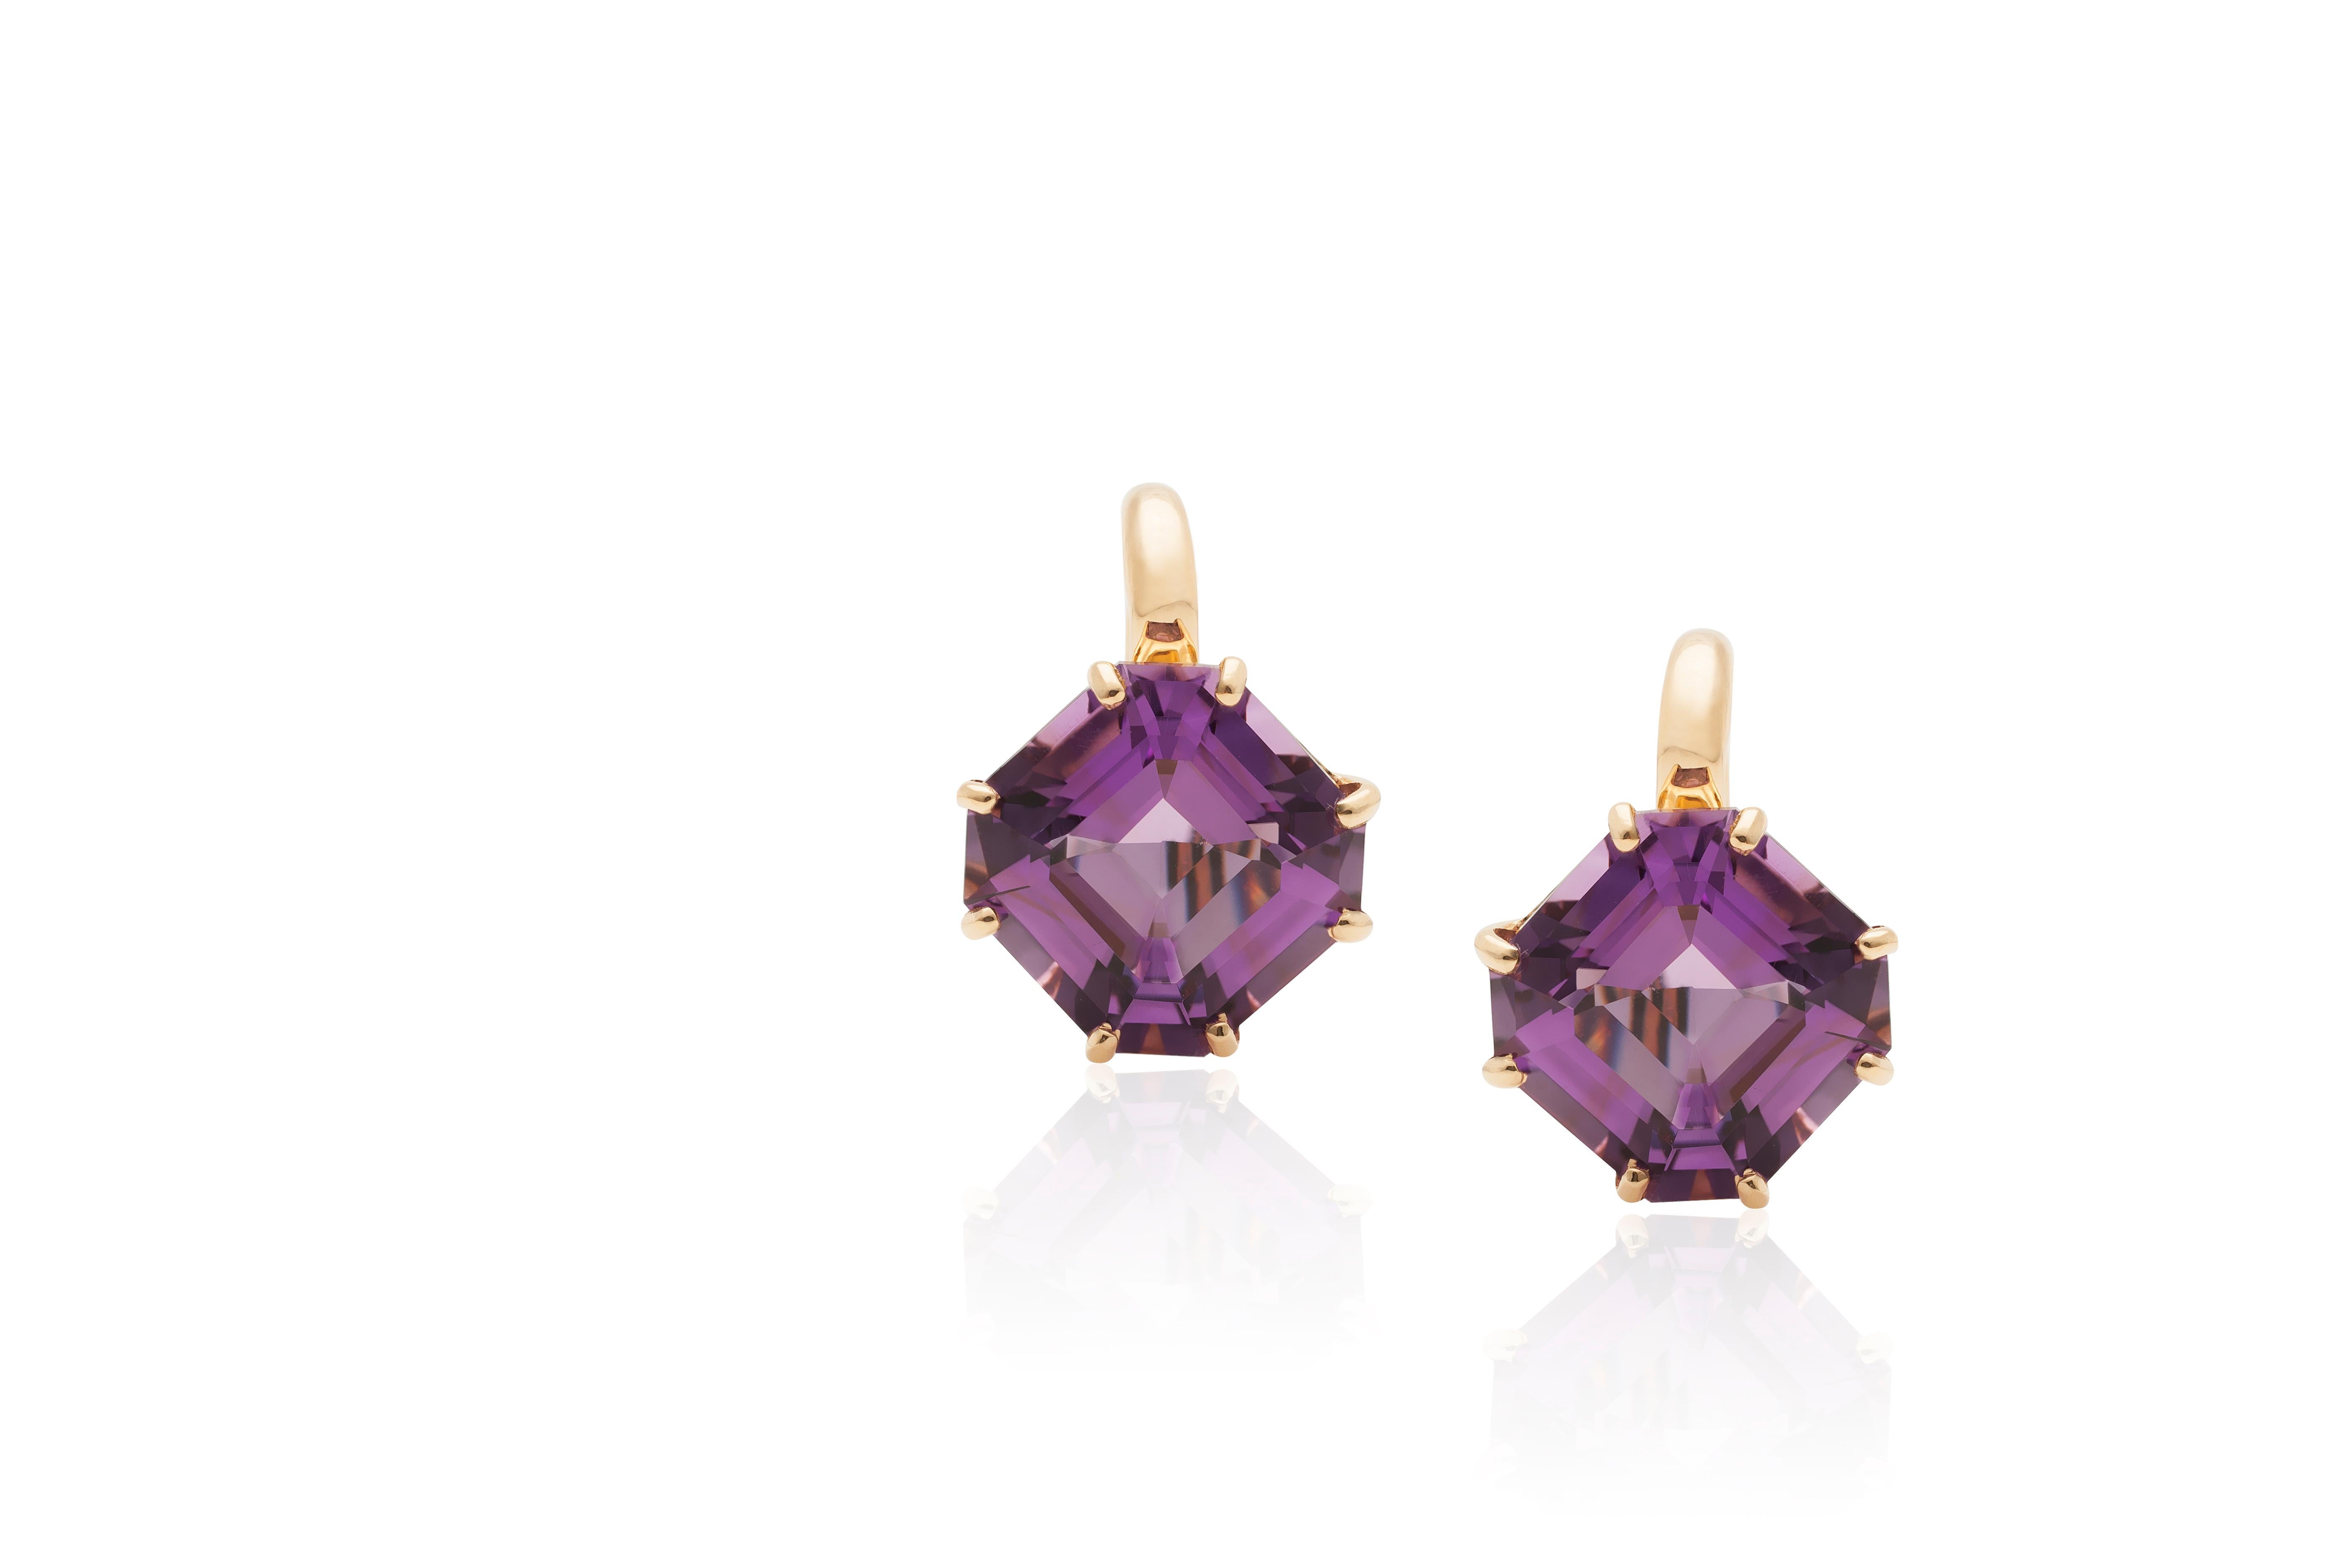 Amethyst Square Emerald Cut Earrings on French Wire in 18K from 'Gossip' Collection
 Stone Size: 12 x 12 mm